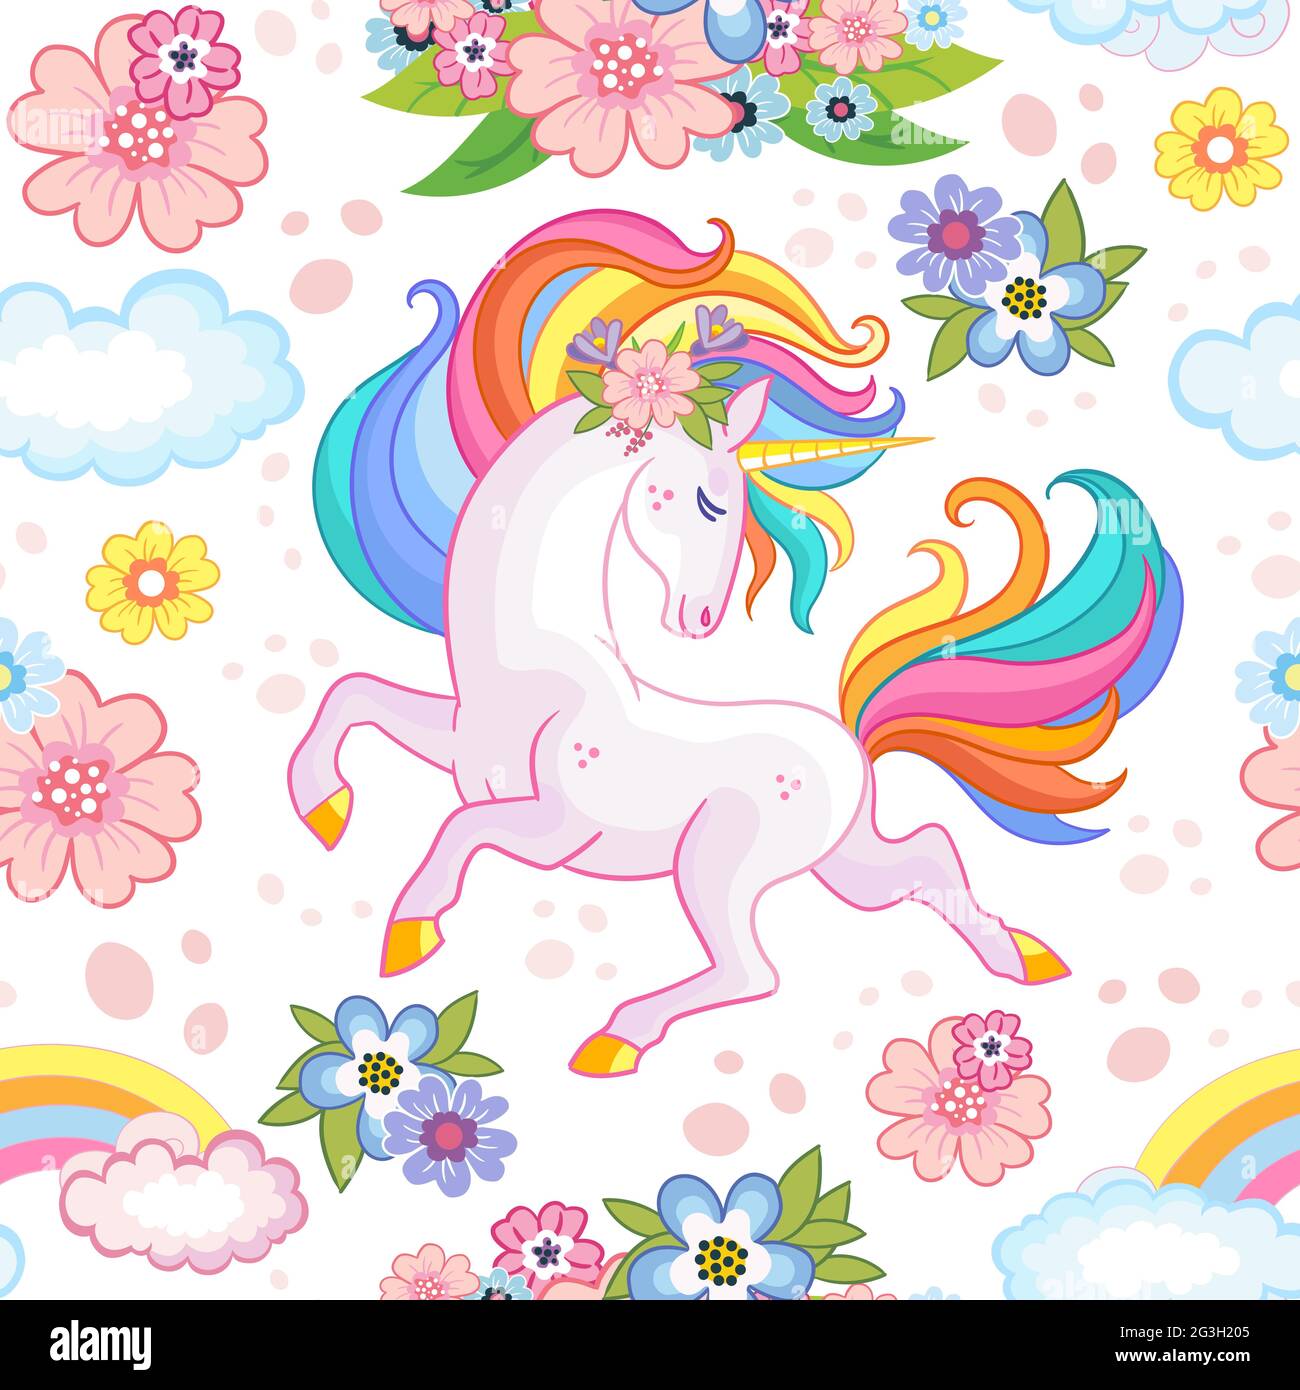 GORGEOUS "UNICORN LOVE" ICE CREAM EXCLUSIVE PRINTED FABRIC SHEETS HAIR BOWS,